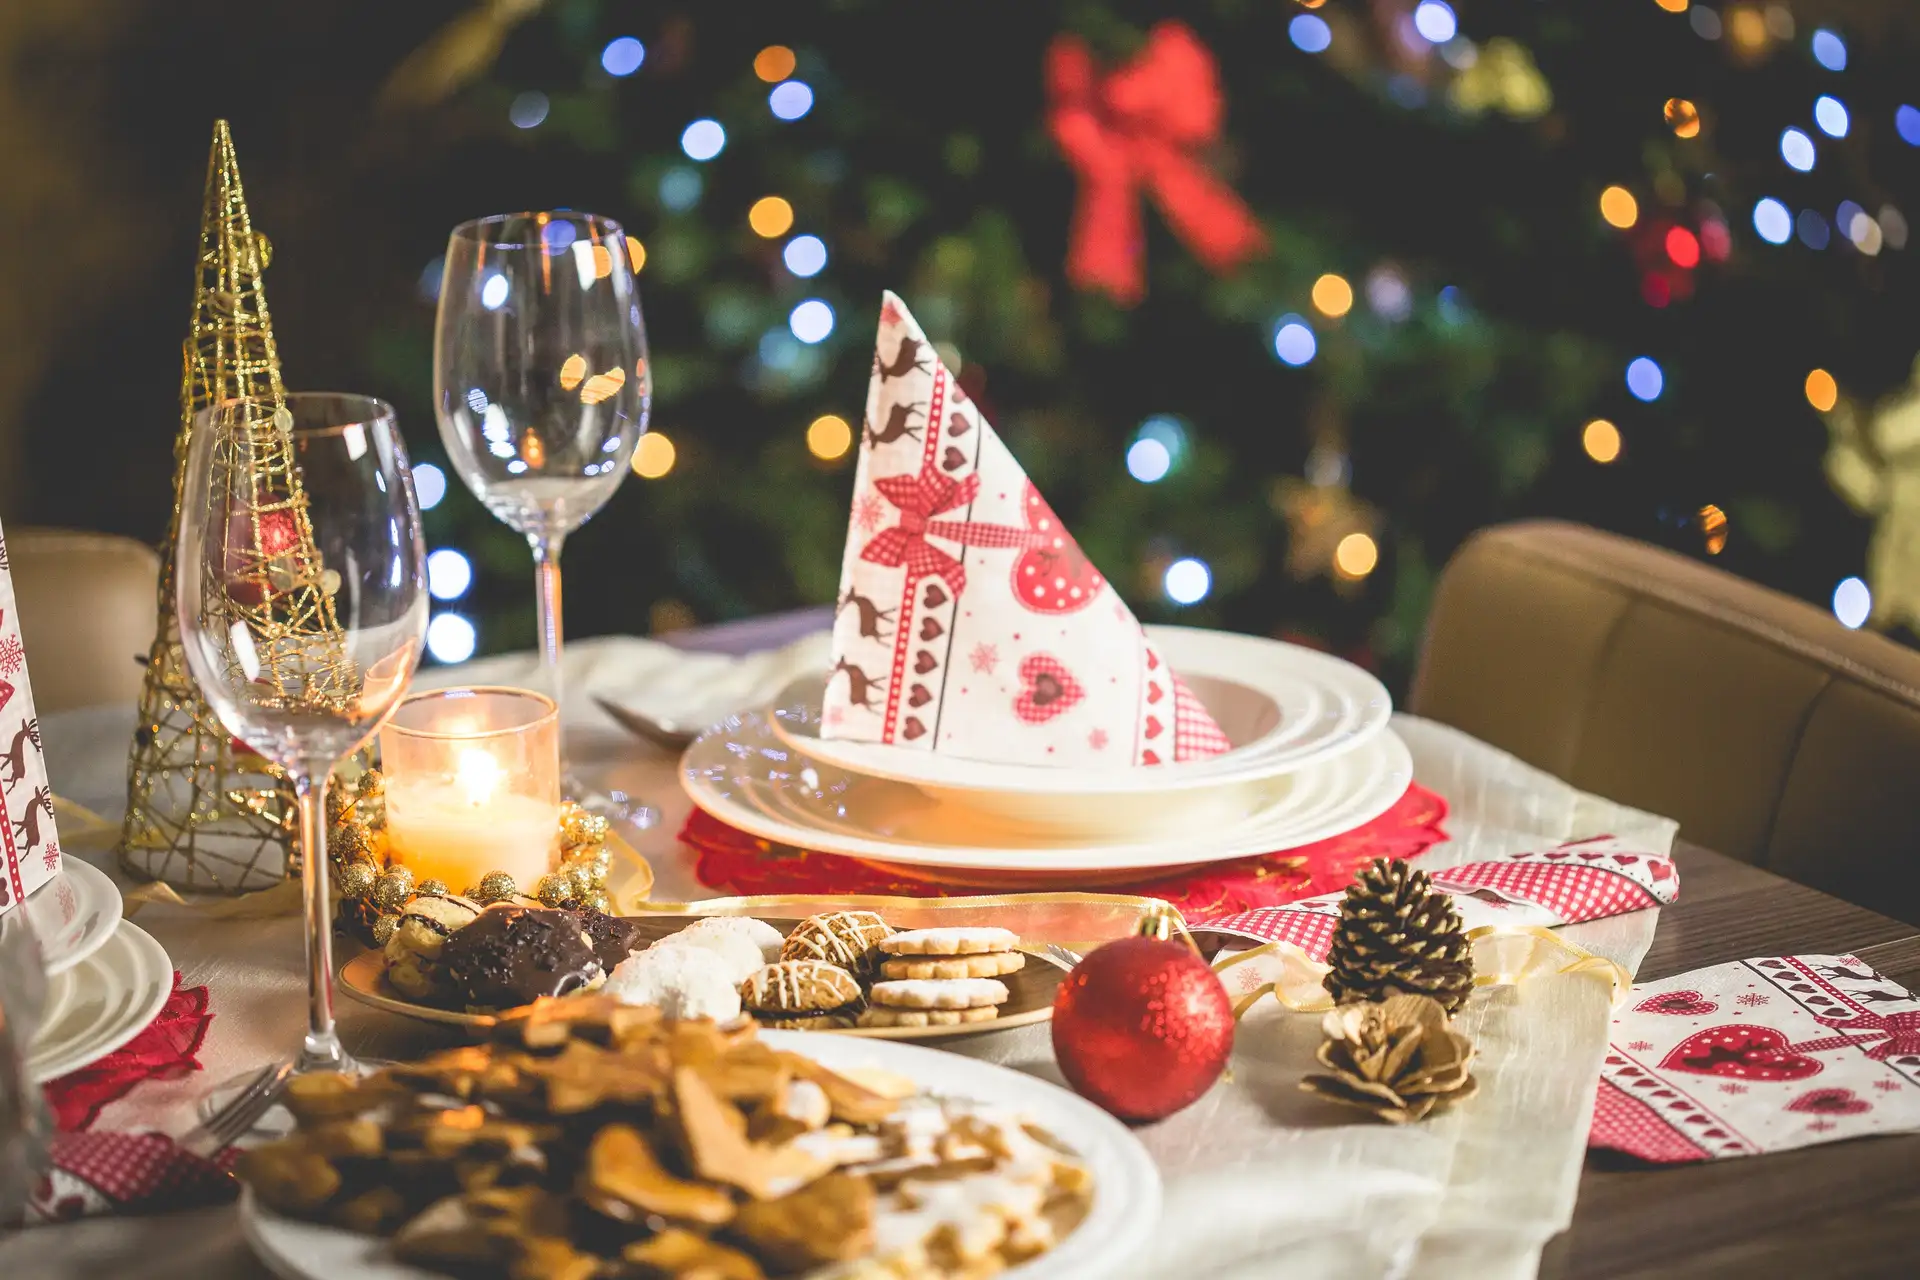 Climate Sceptics at your Christmas dinner? Here is what you should answer